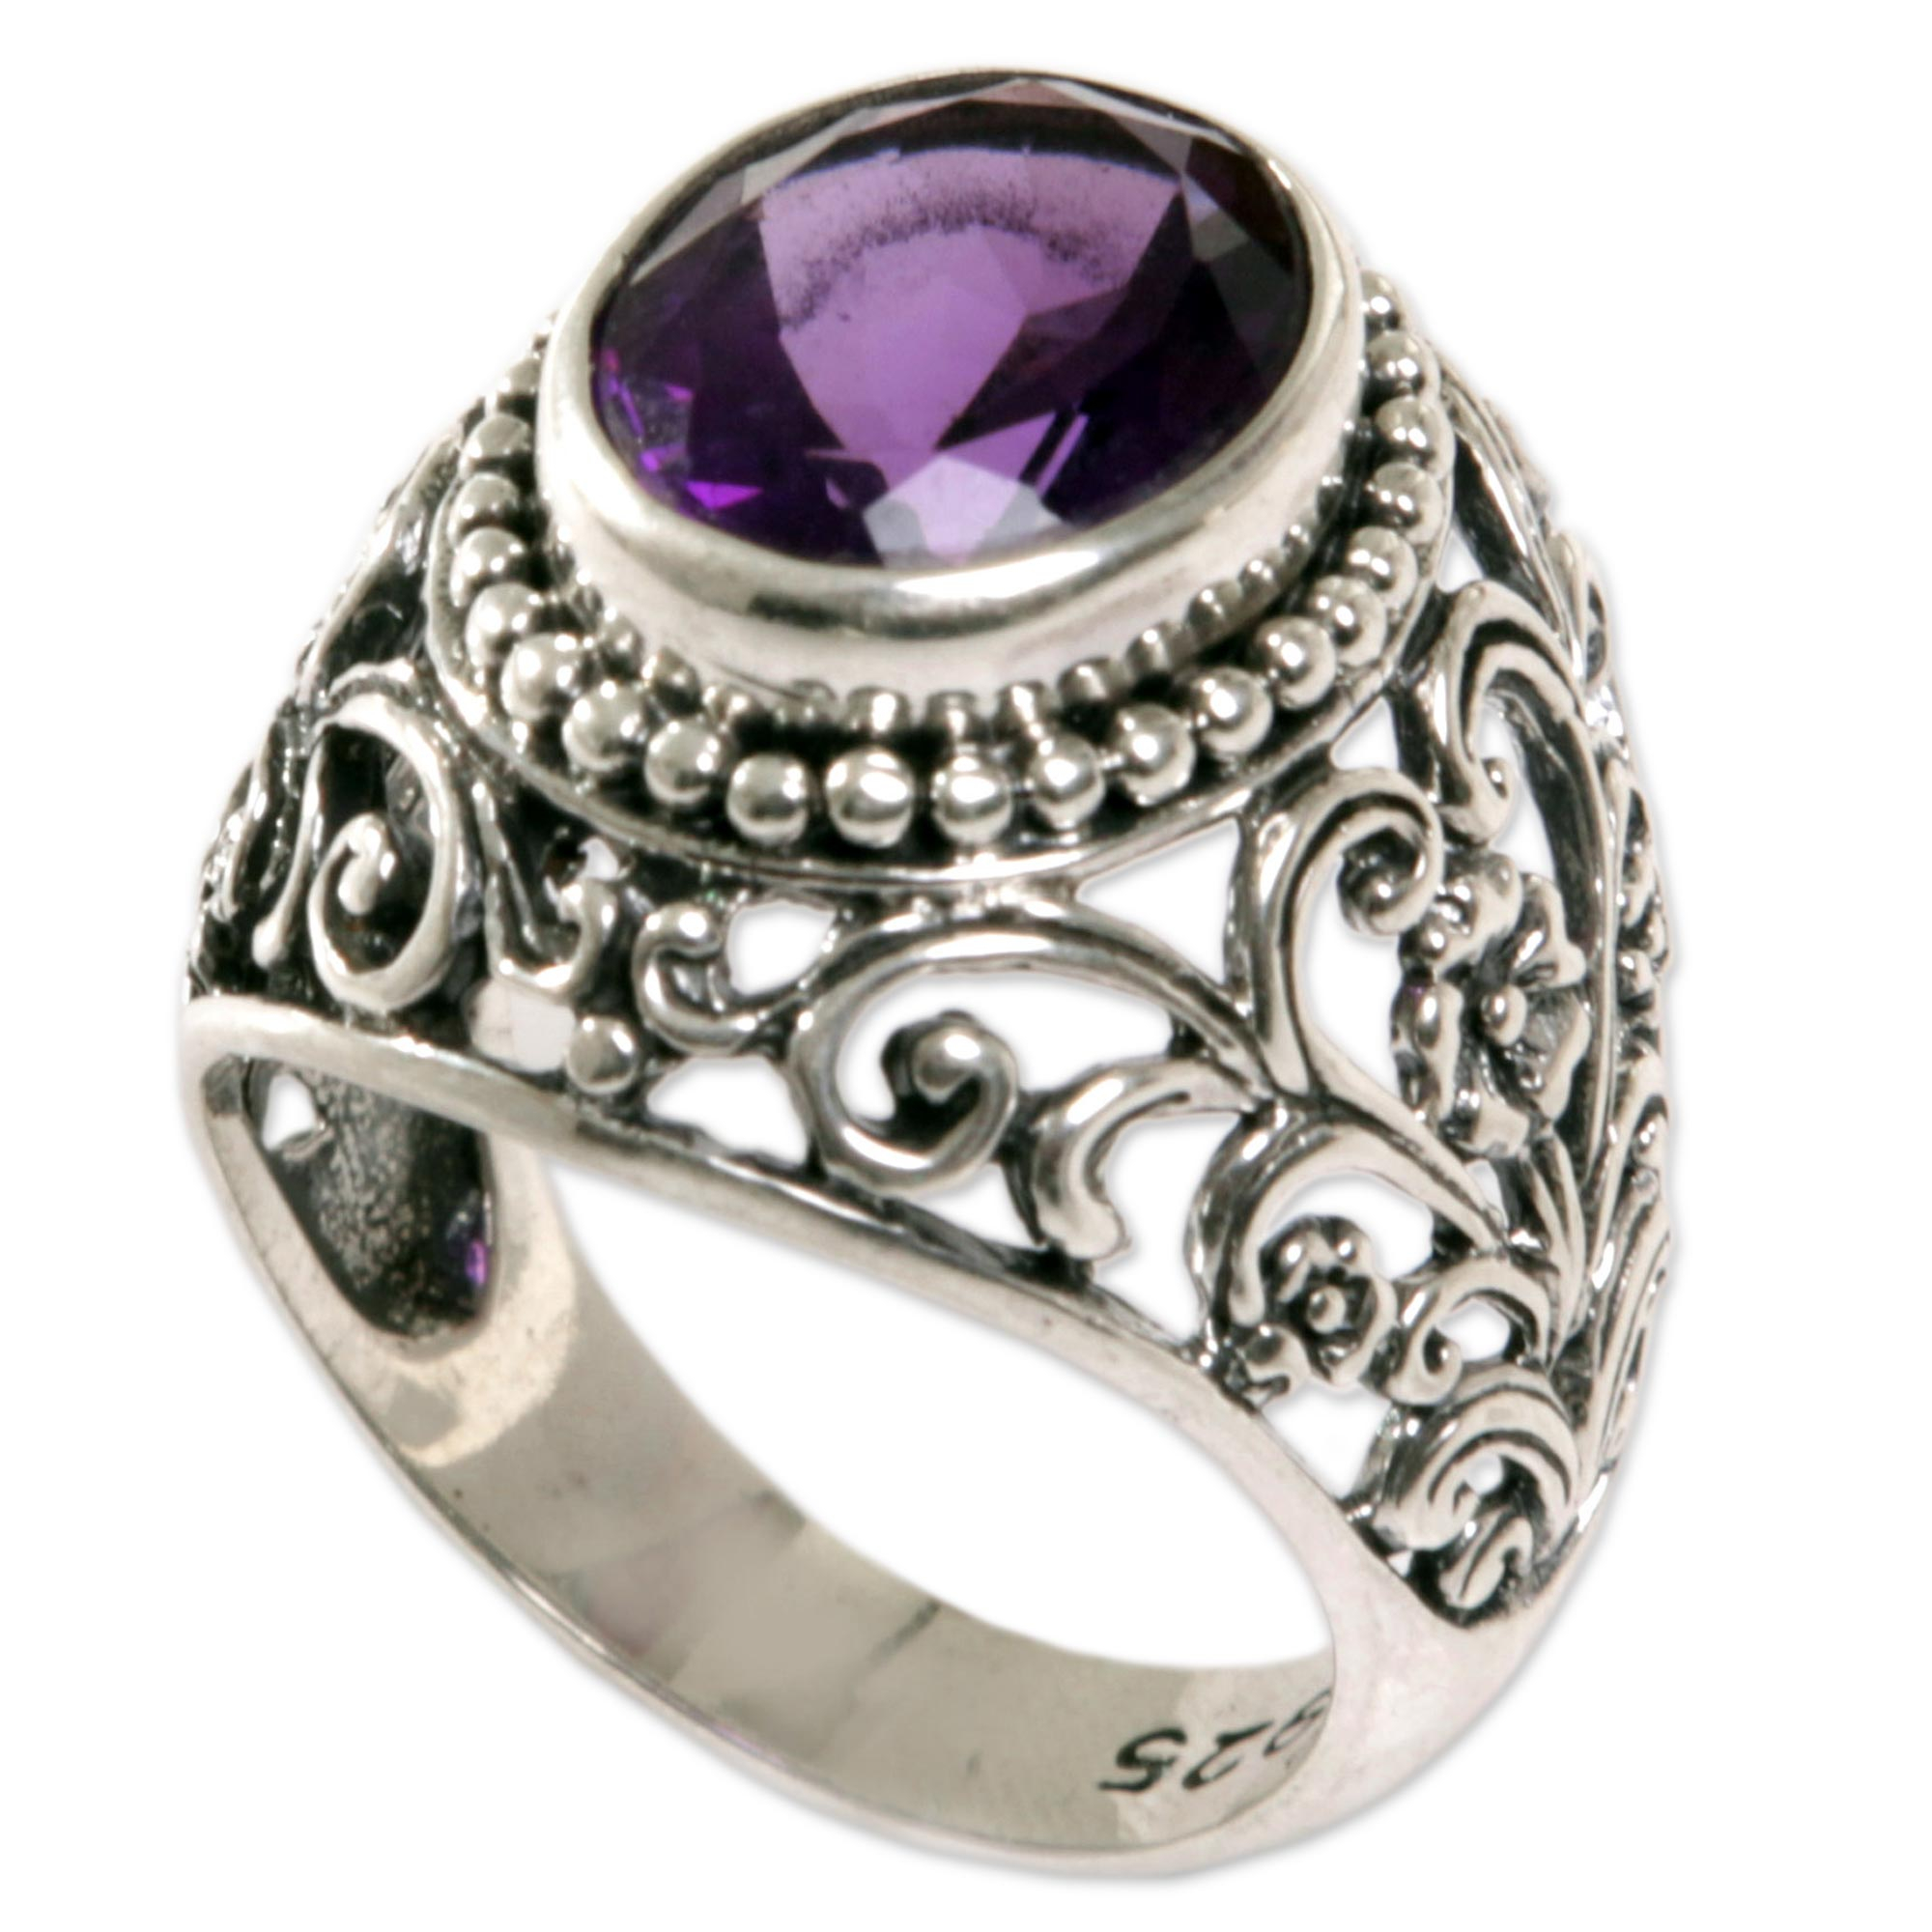 Amethyst Cocktail Ring Handcrafted in Indonesia - Mystical Purple | NOVICA